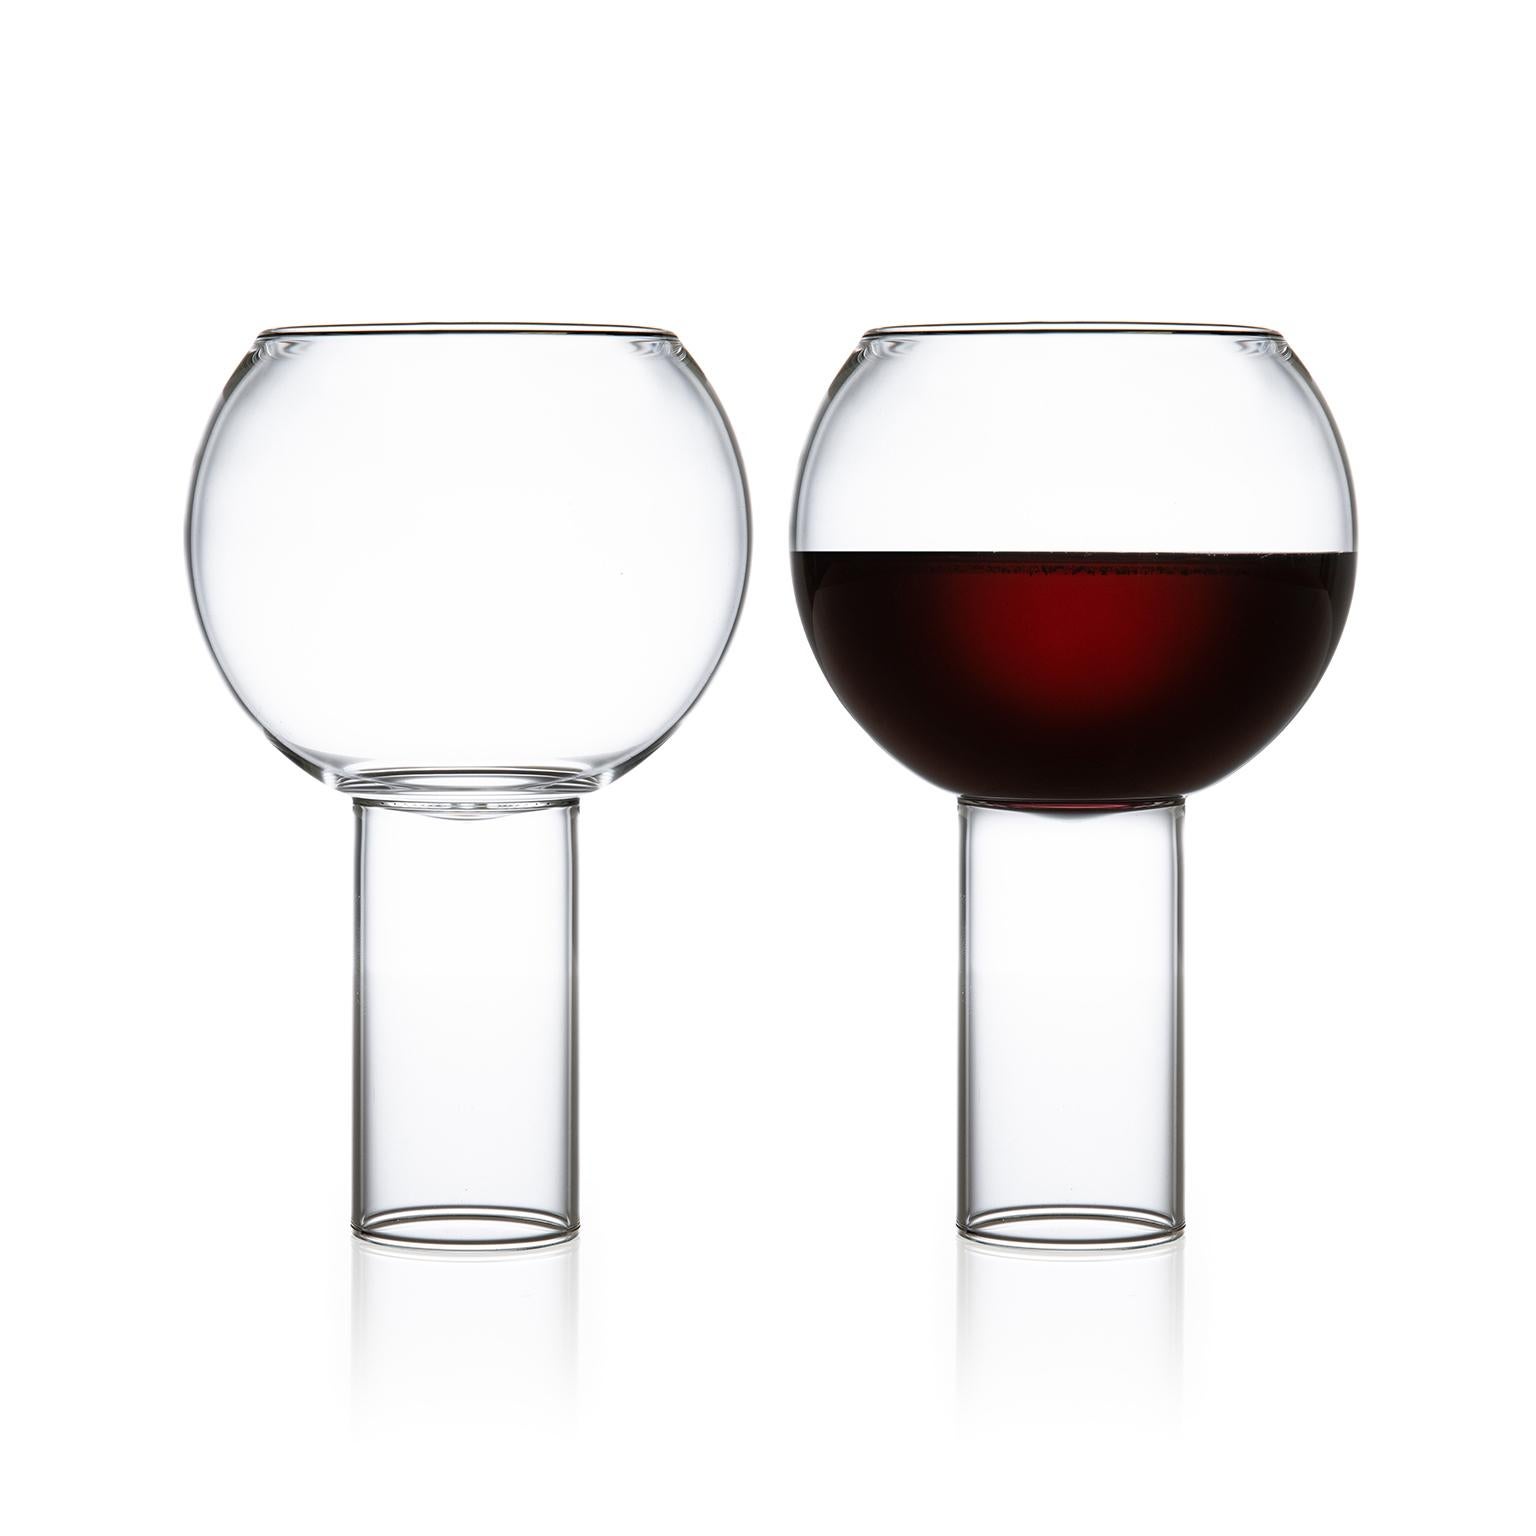 Tulip tall large - set of two.

The Tulip collection was inspired by the small bistro wine glasses found in European bars and cafes. The bowl of the glass sits down into the cylindrical stem, highlighting the intersection between the two. With